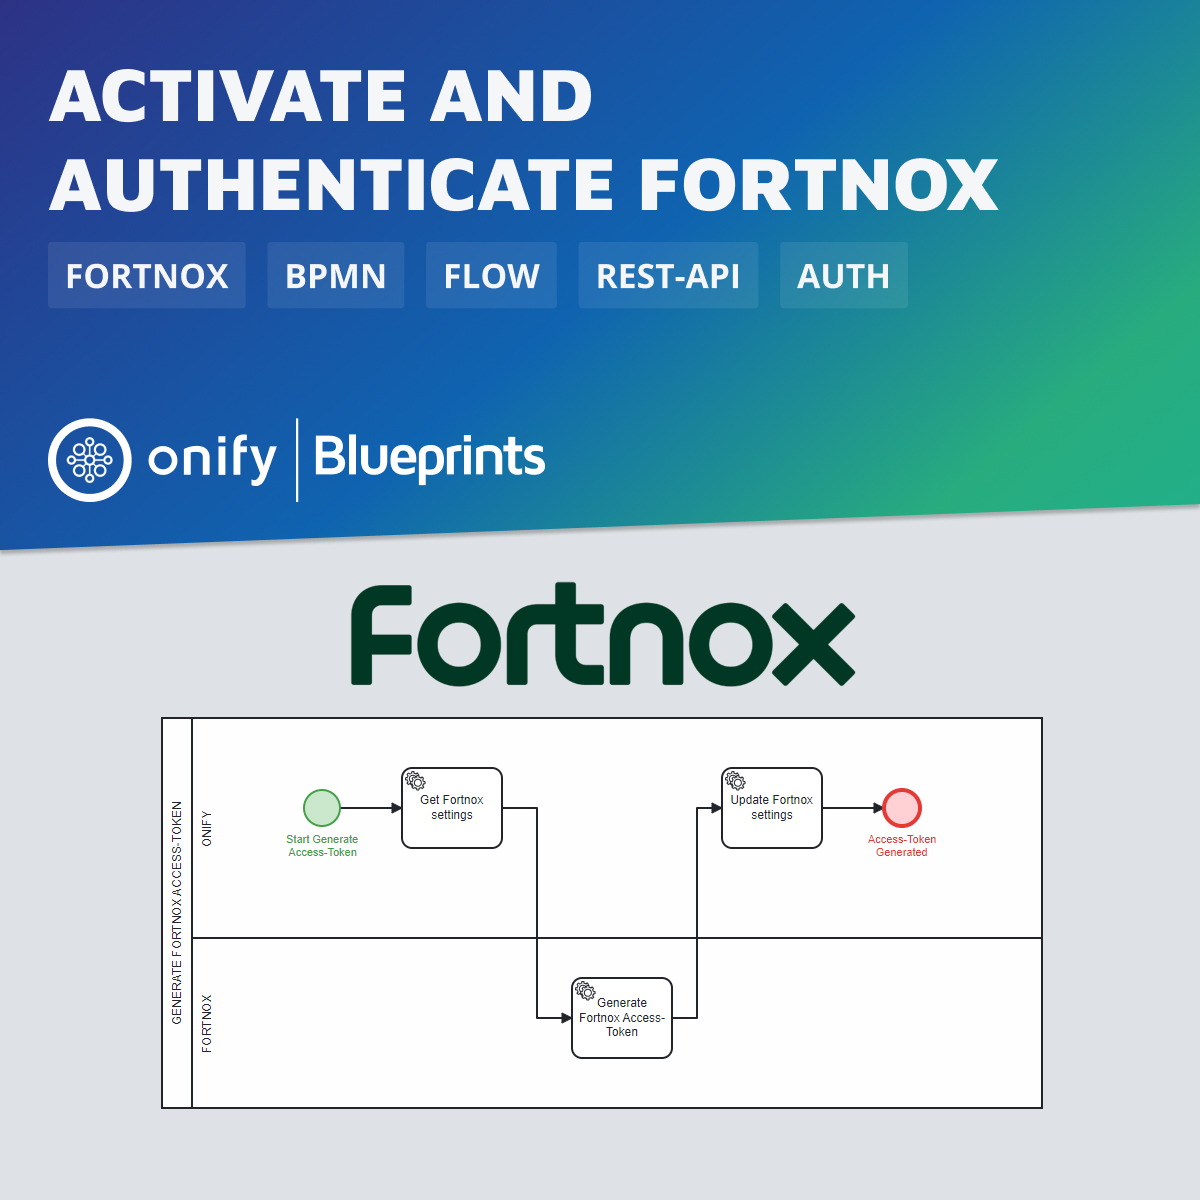 Onify Blueprint – Activate and authenticate Fortnox integration